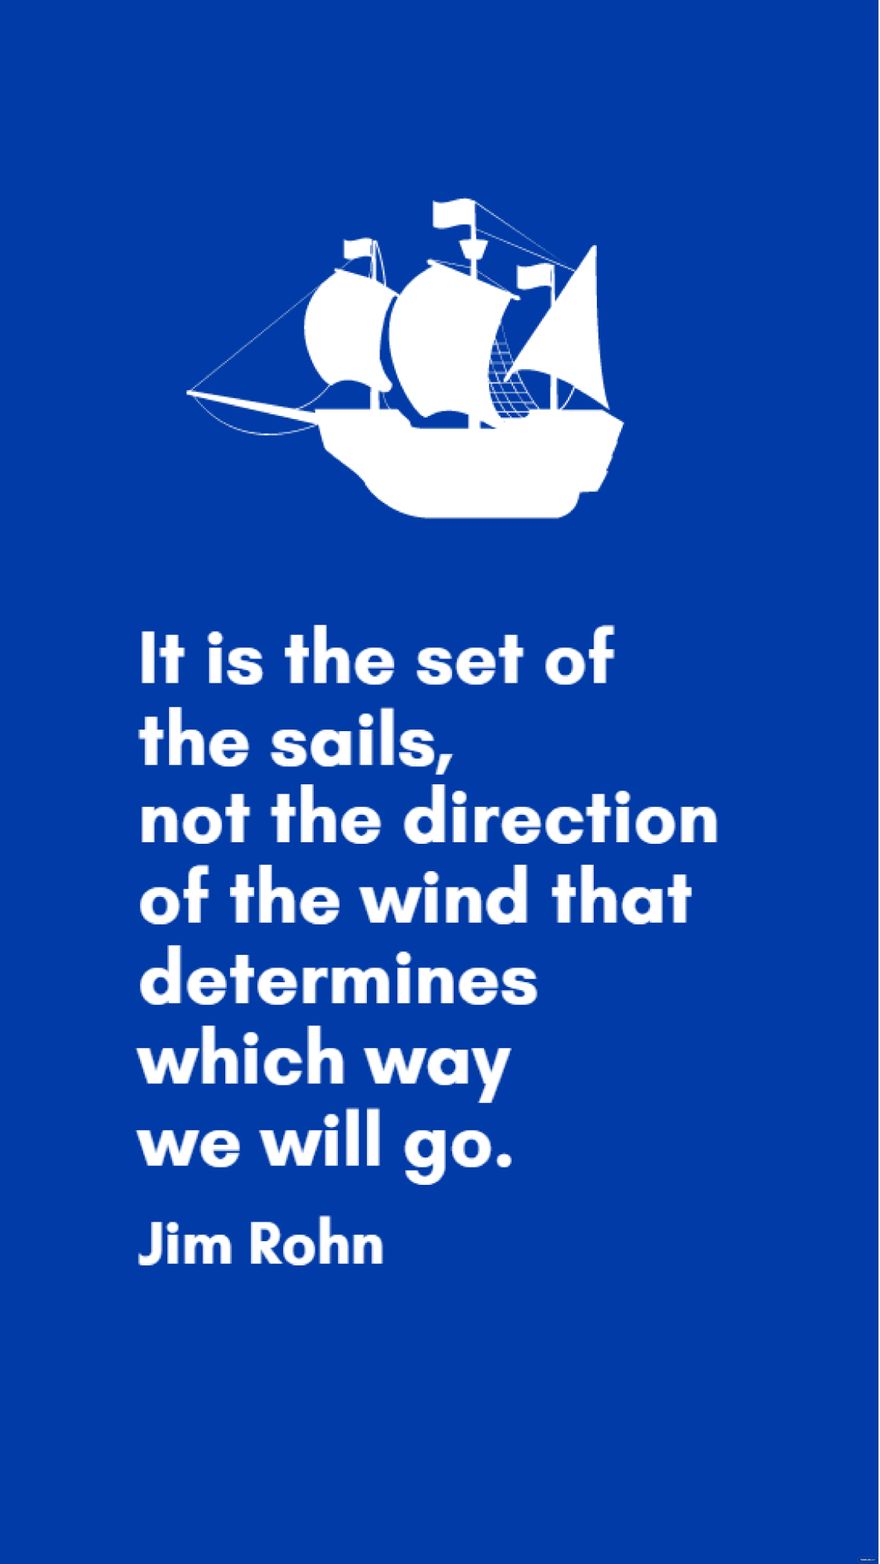 Free Jim Rohn - It is the set of the sails, not the direction of the wind that determines which way we will go. in JPG